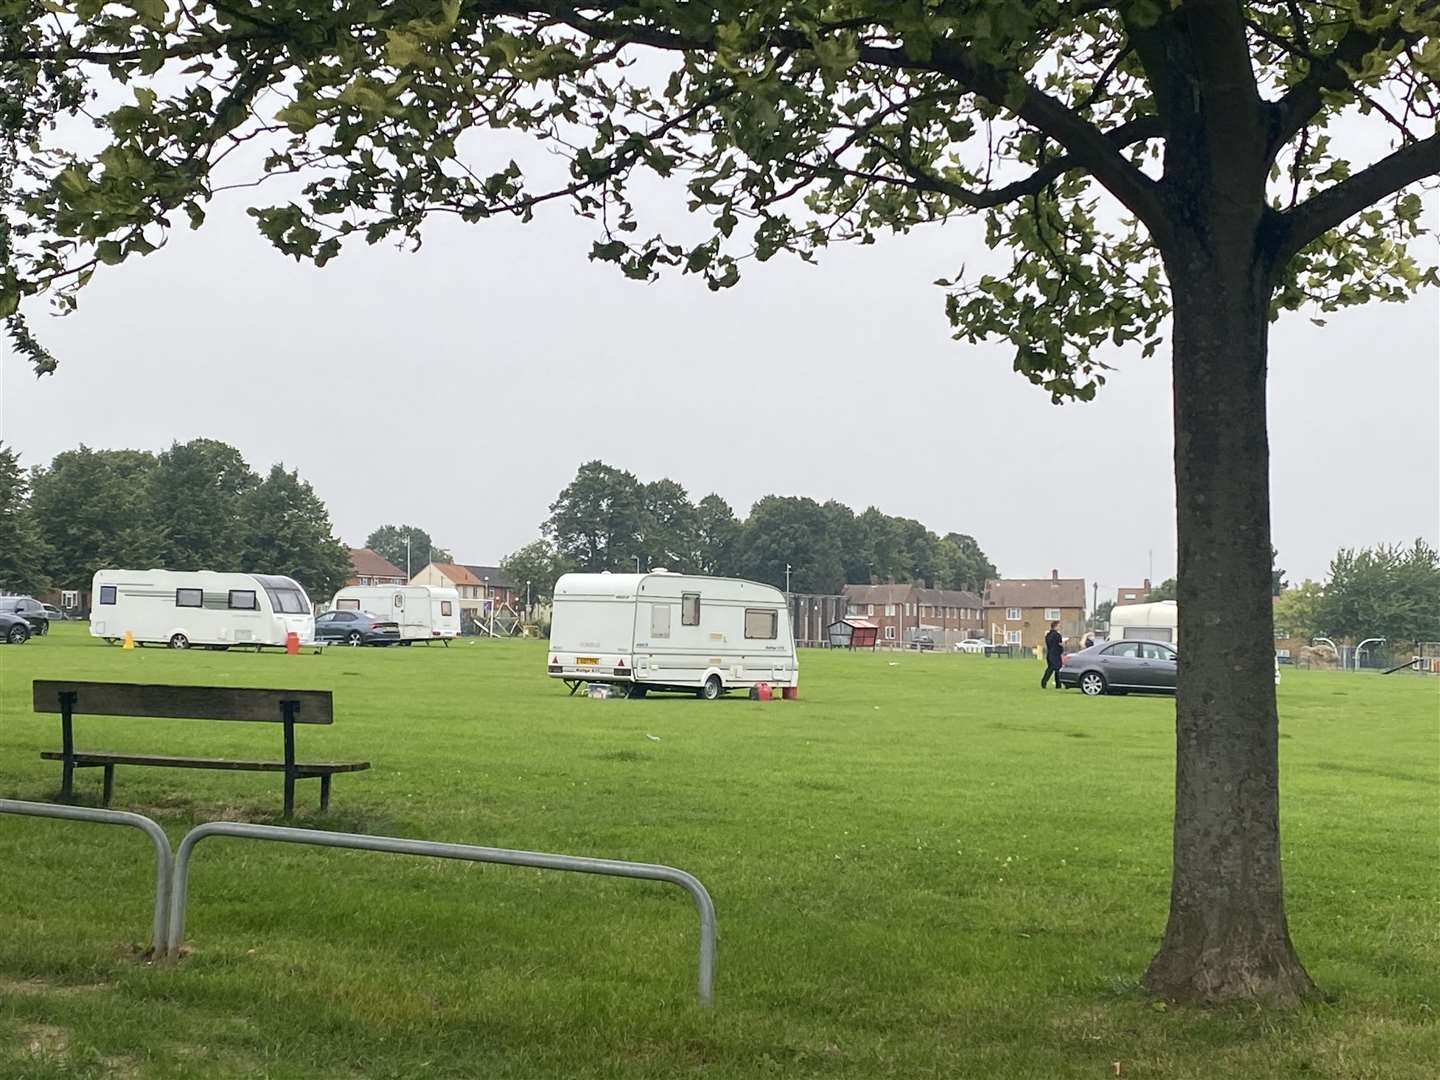 Caravans arrived on Beechings playing fields on Sunday night